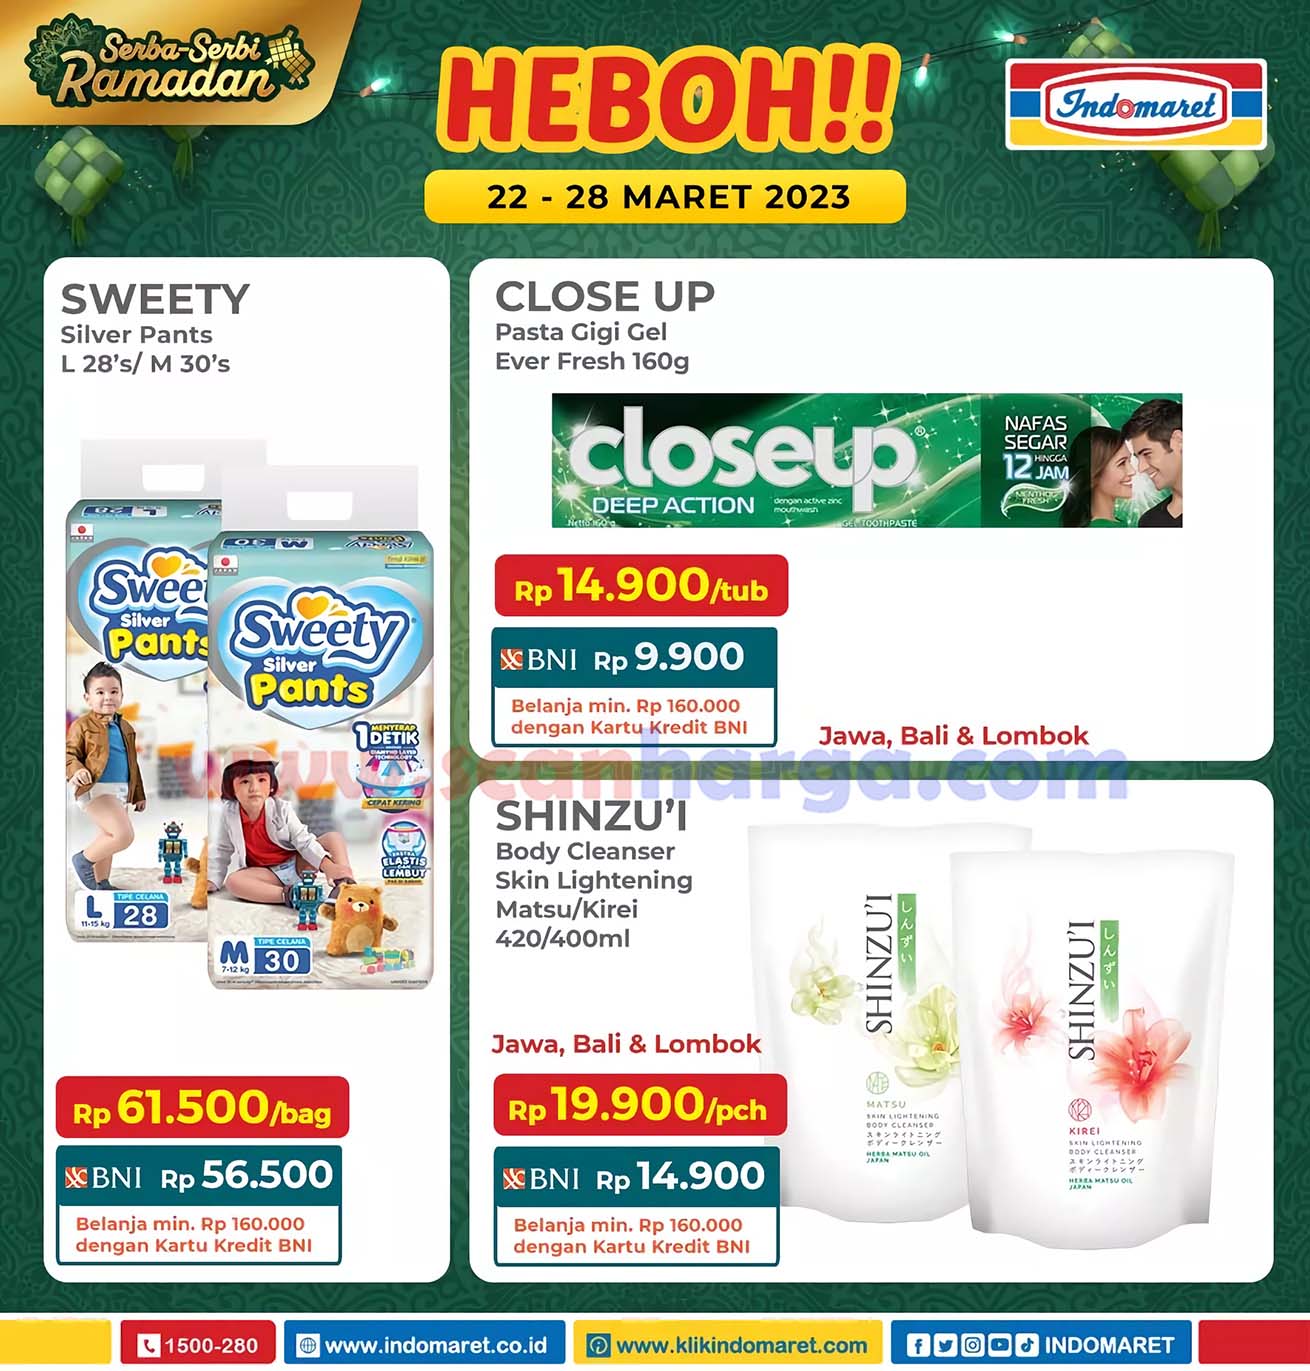 Promo Indomaret Heboh & Product Of The Week PTW 22 - 28 Maret 2023